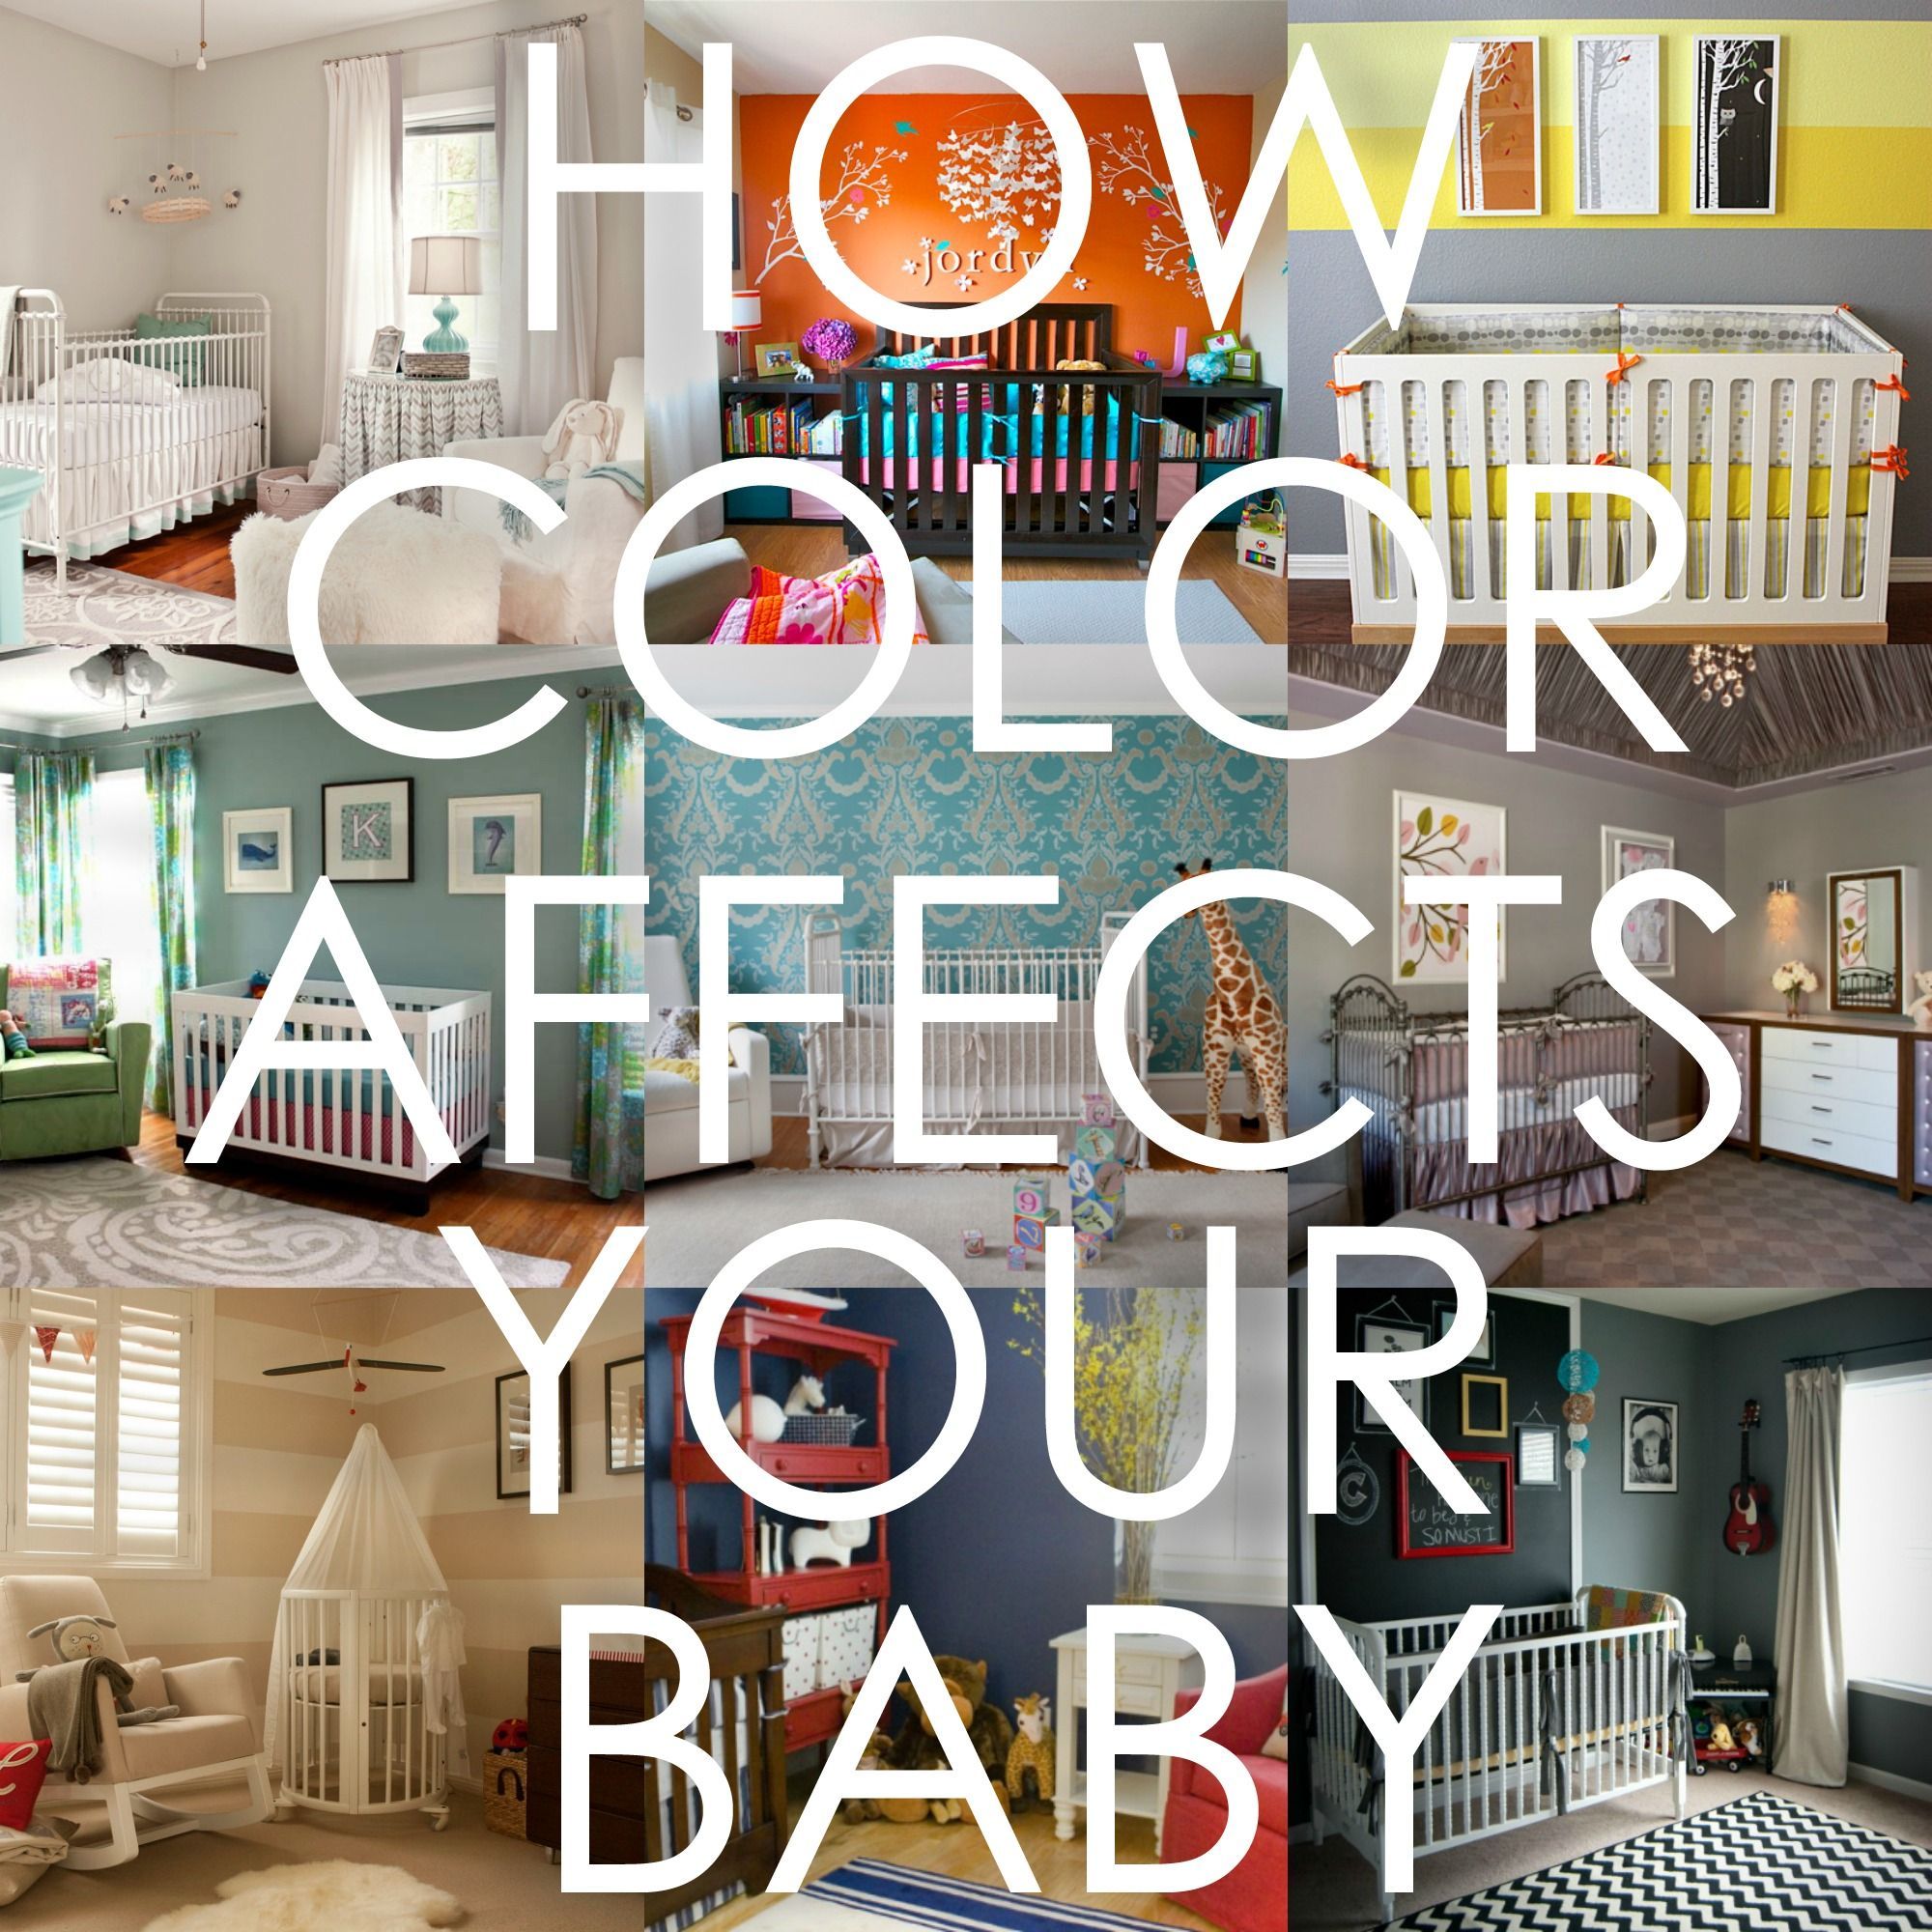 How Color Affects Your Baby – This could help you decide on nursery colors! | Project Nursery